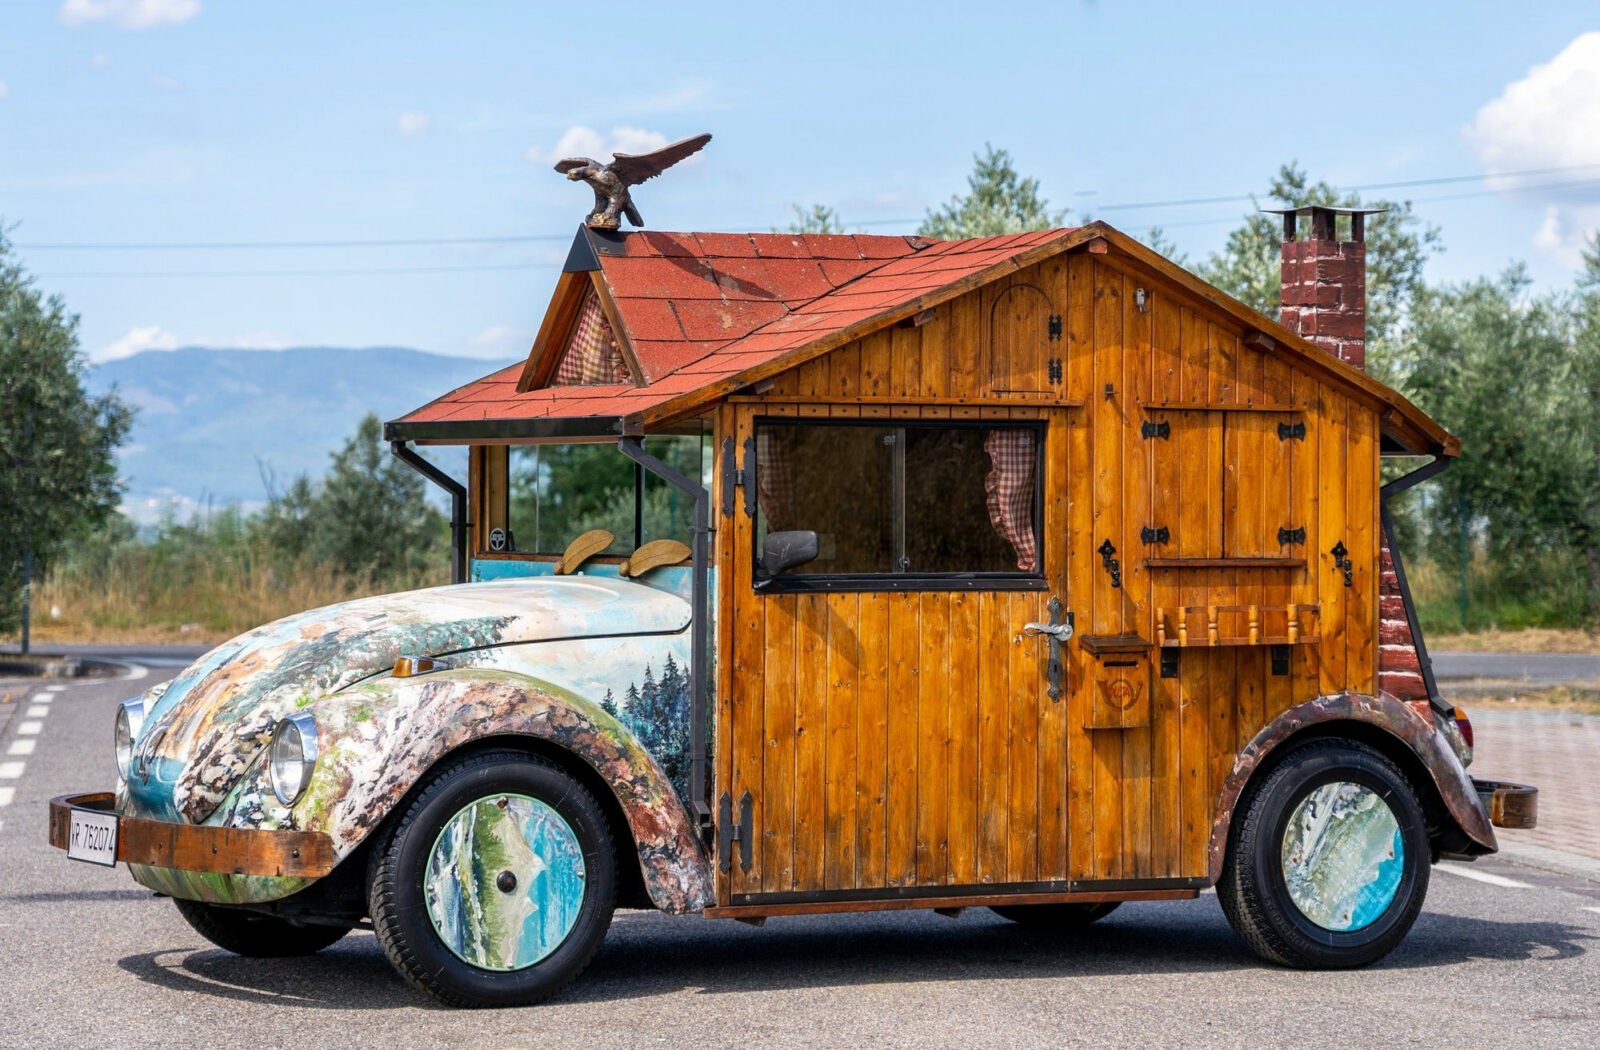 For Sale: A Volkswagen Beetle Swiss Cabin (With A Working Chimney)